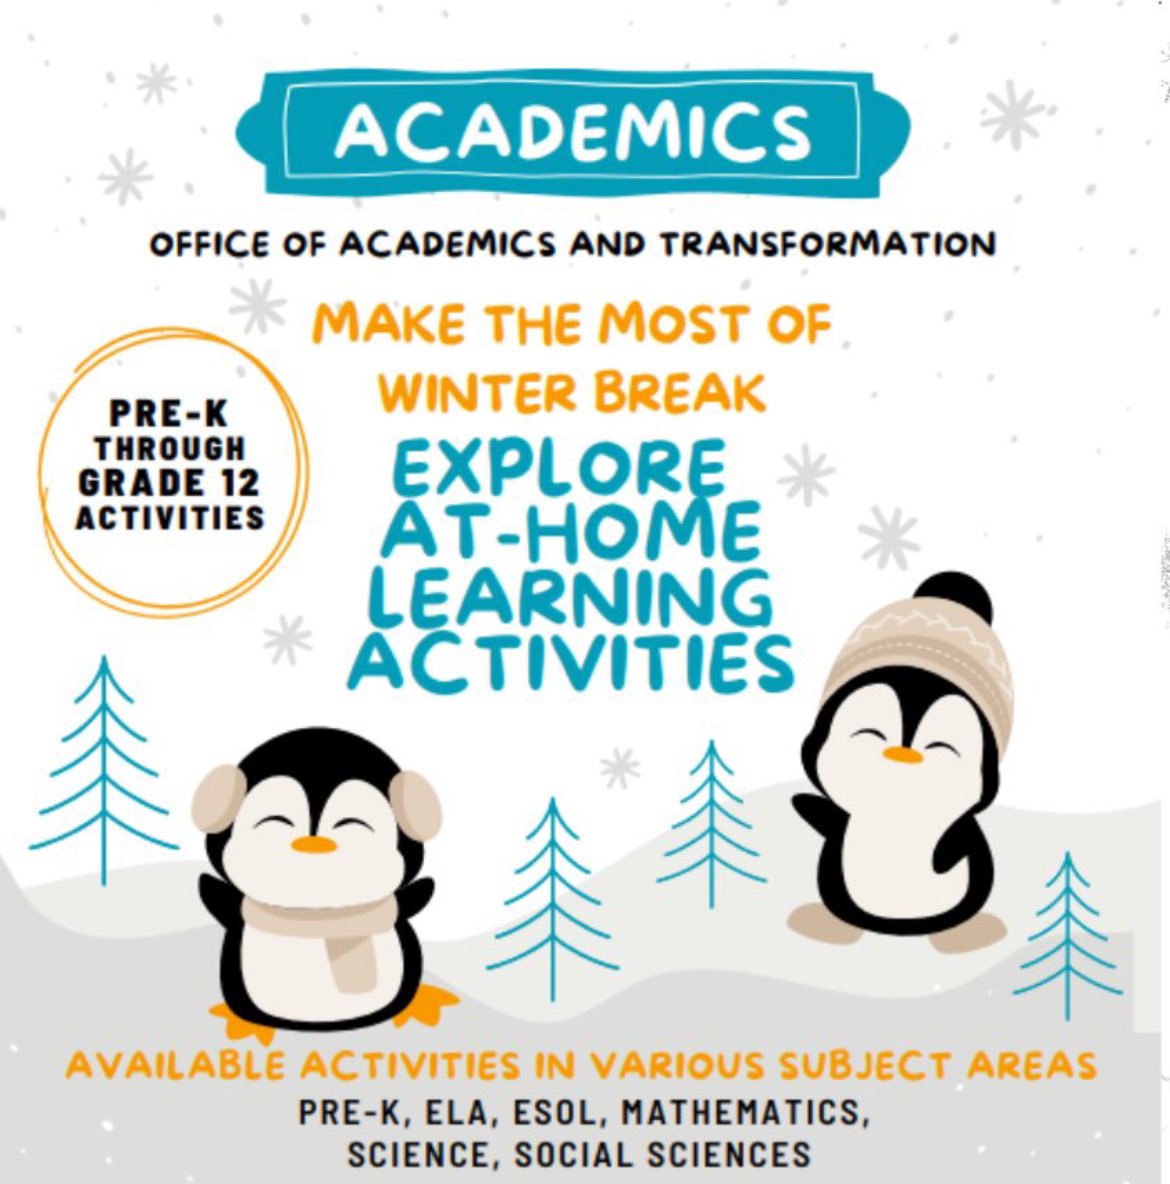 Winter break at-home activities are now available to all @MDCPS students (pre-k through 12th grade) in Schoology. #YourBestChoiceMDCPS